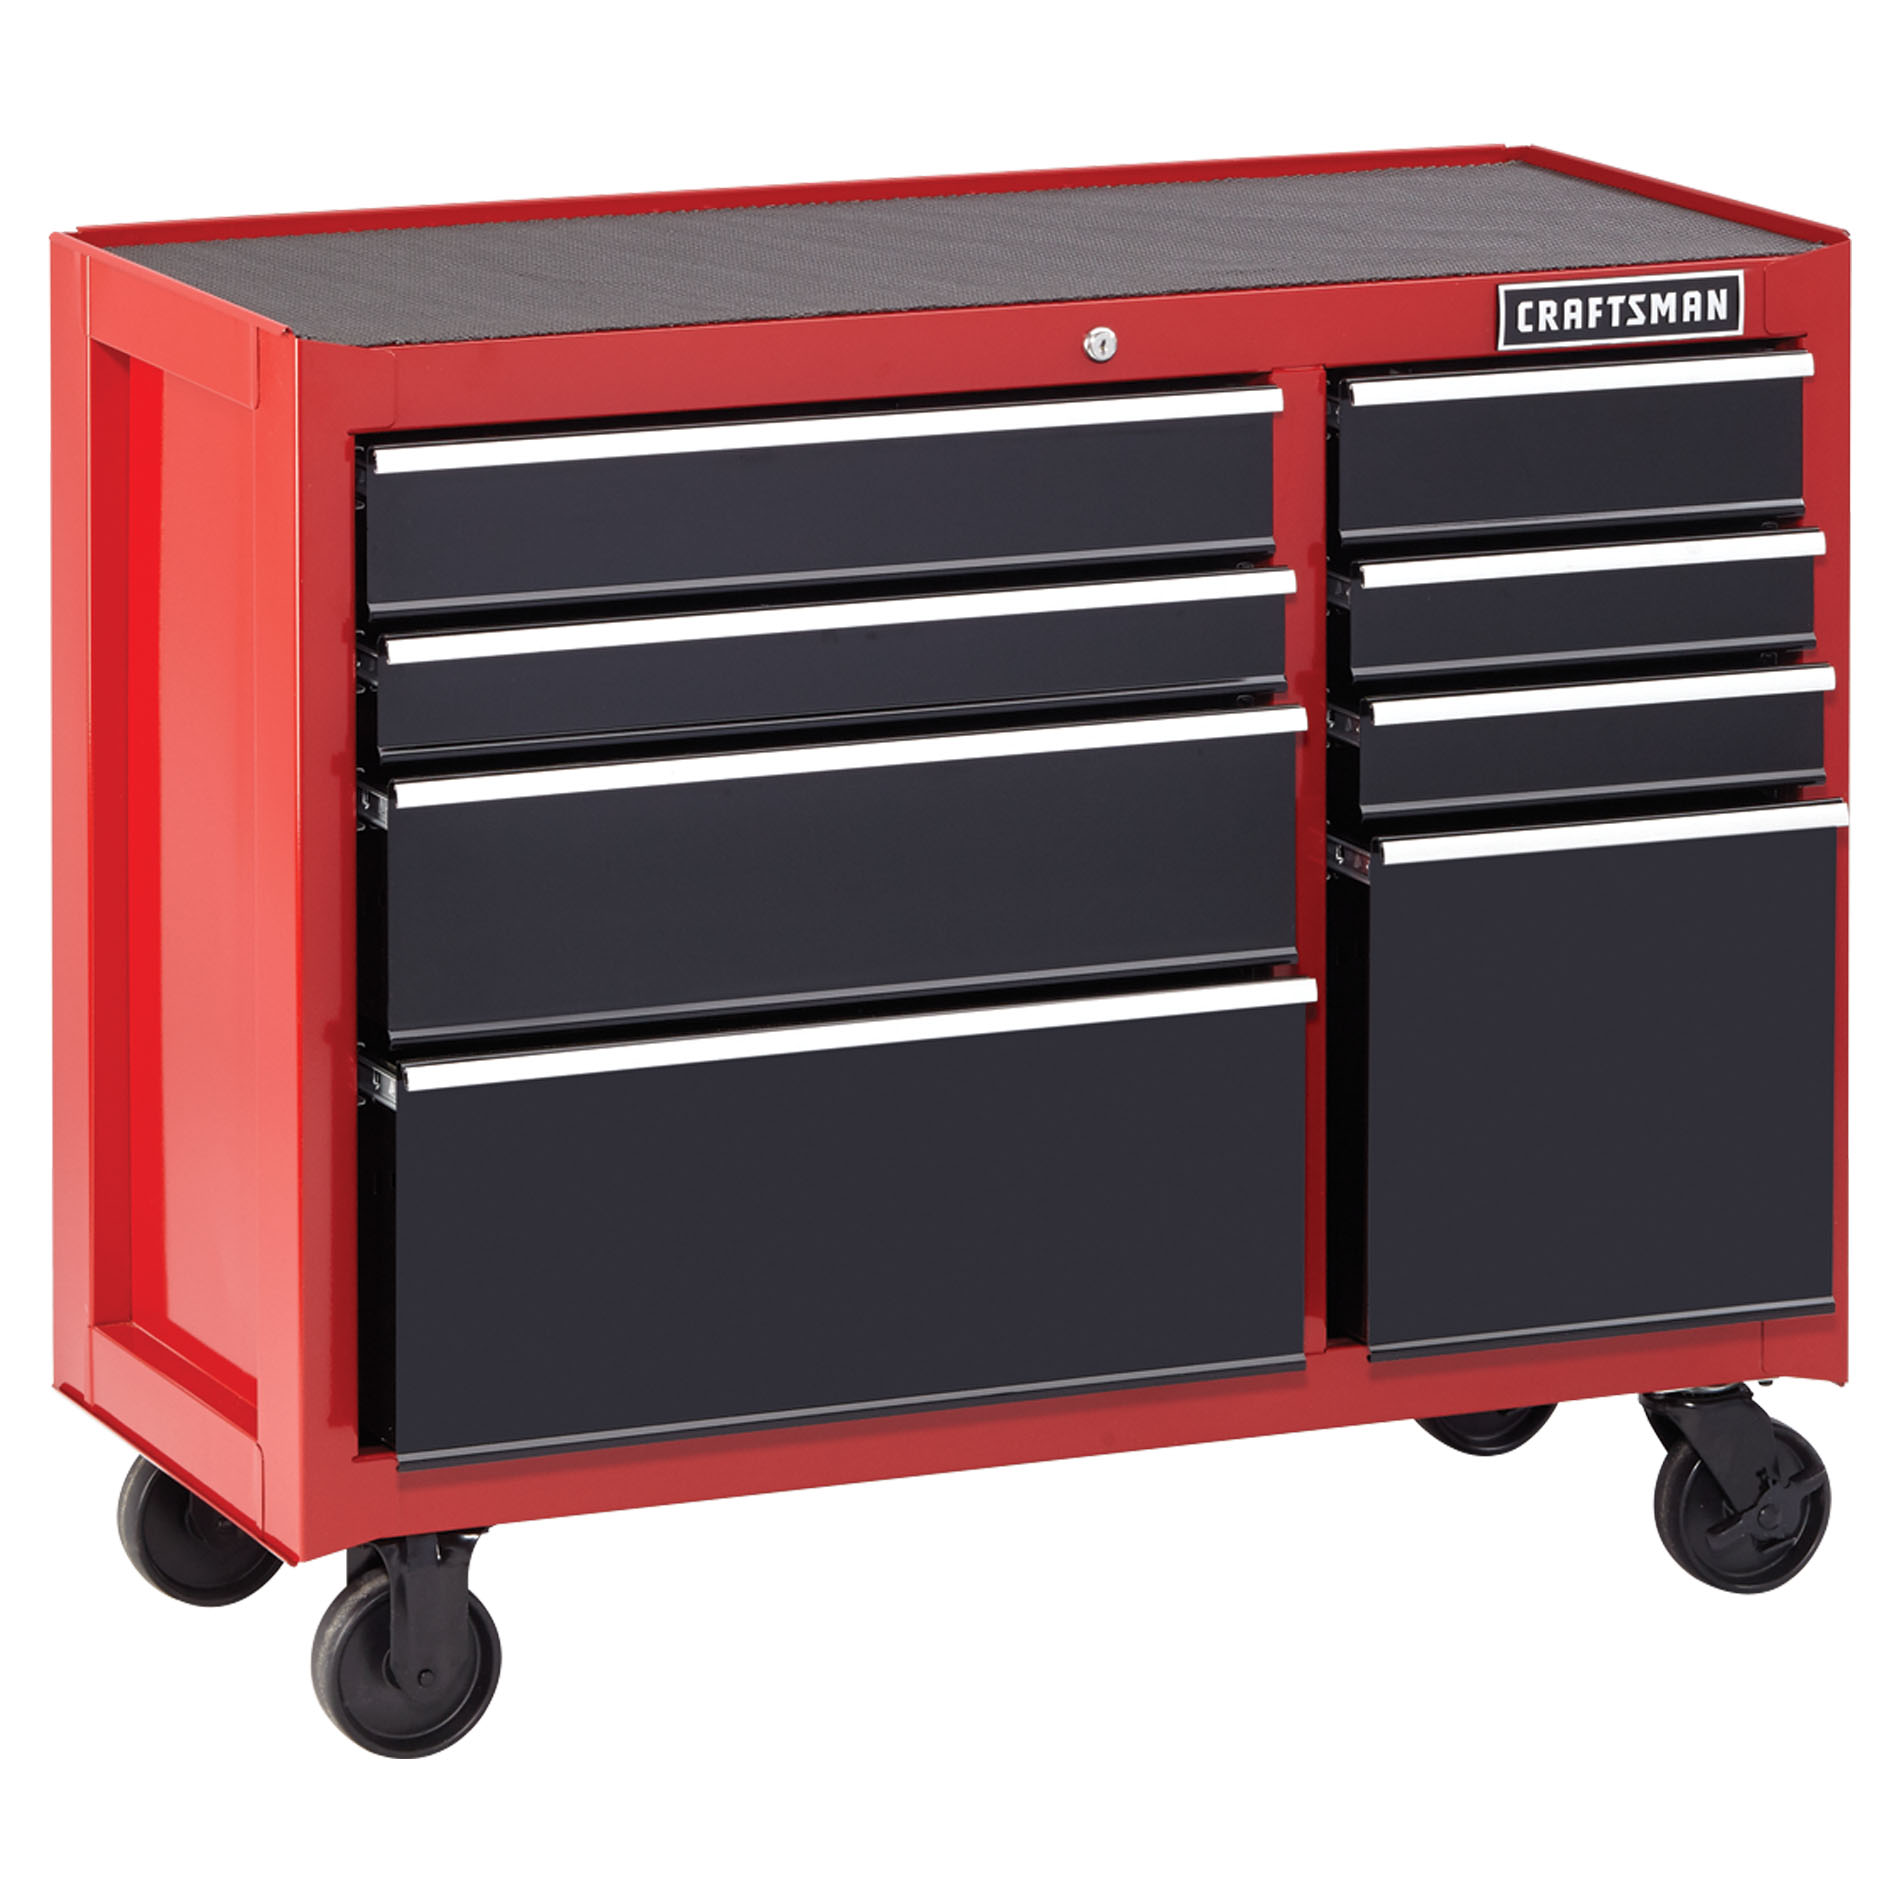 Craftsman 41 8 Drawer Heavy Duty Rolling Cabinet Red Black